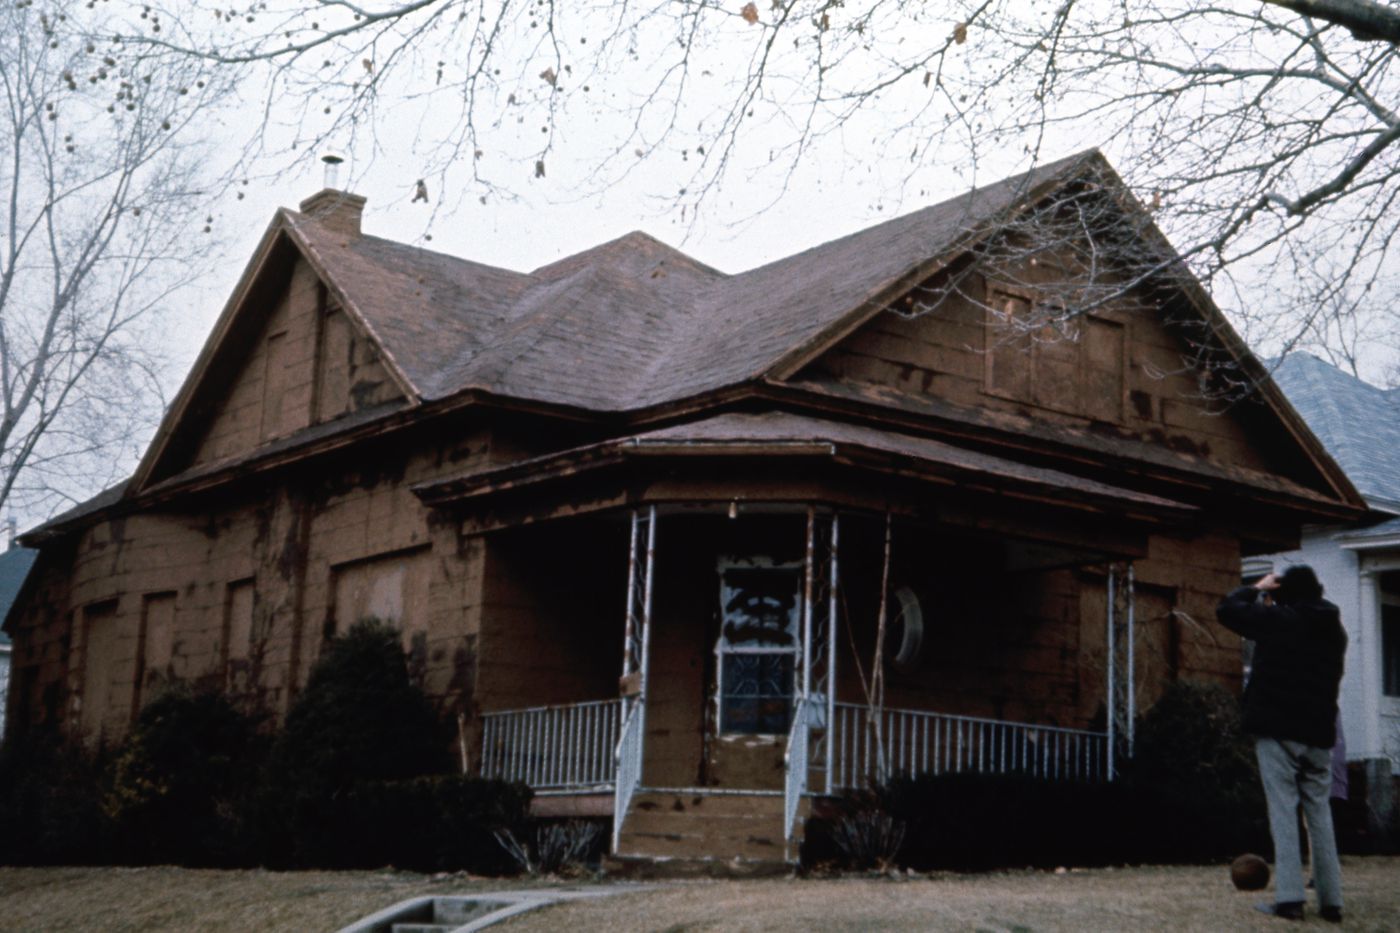 Photograph of Clay House